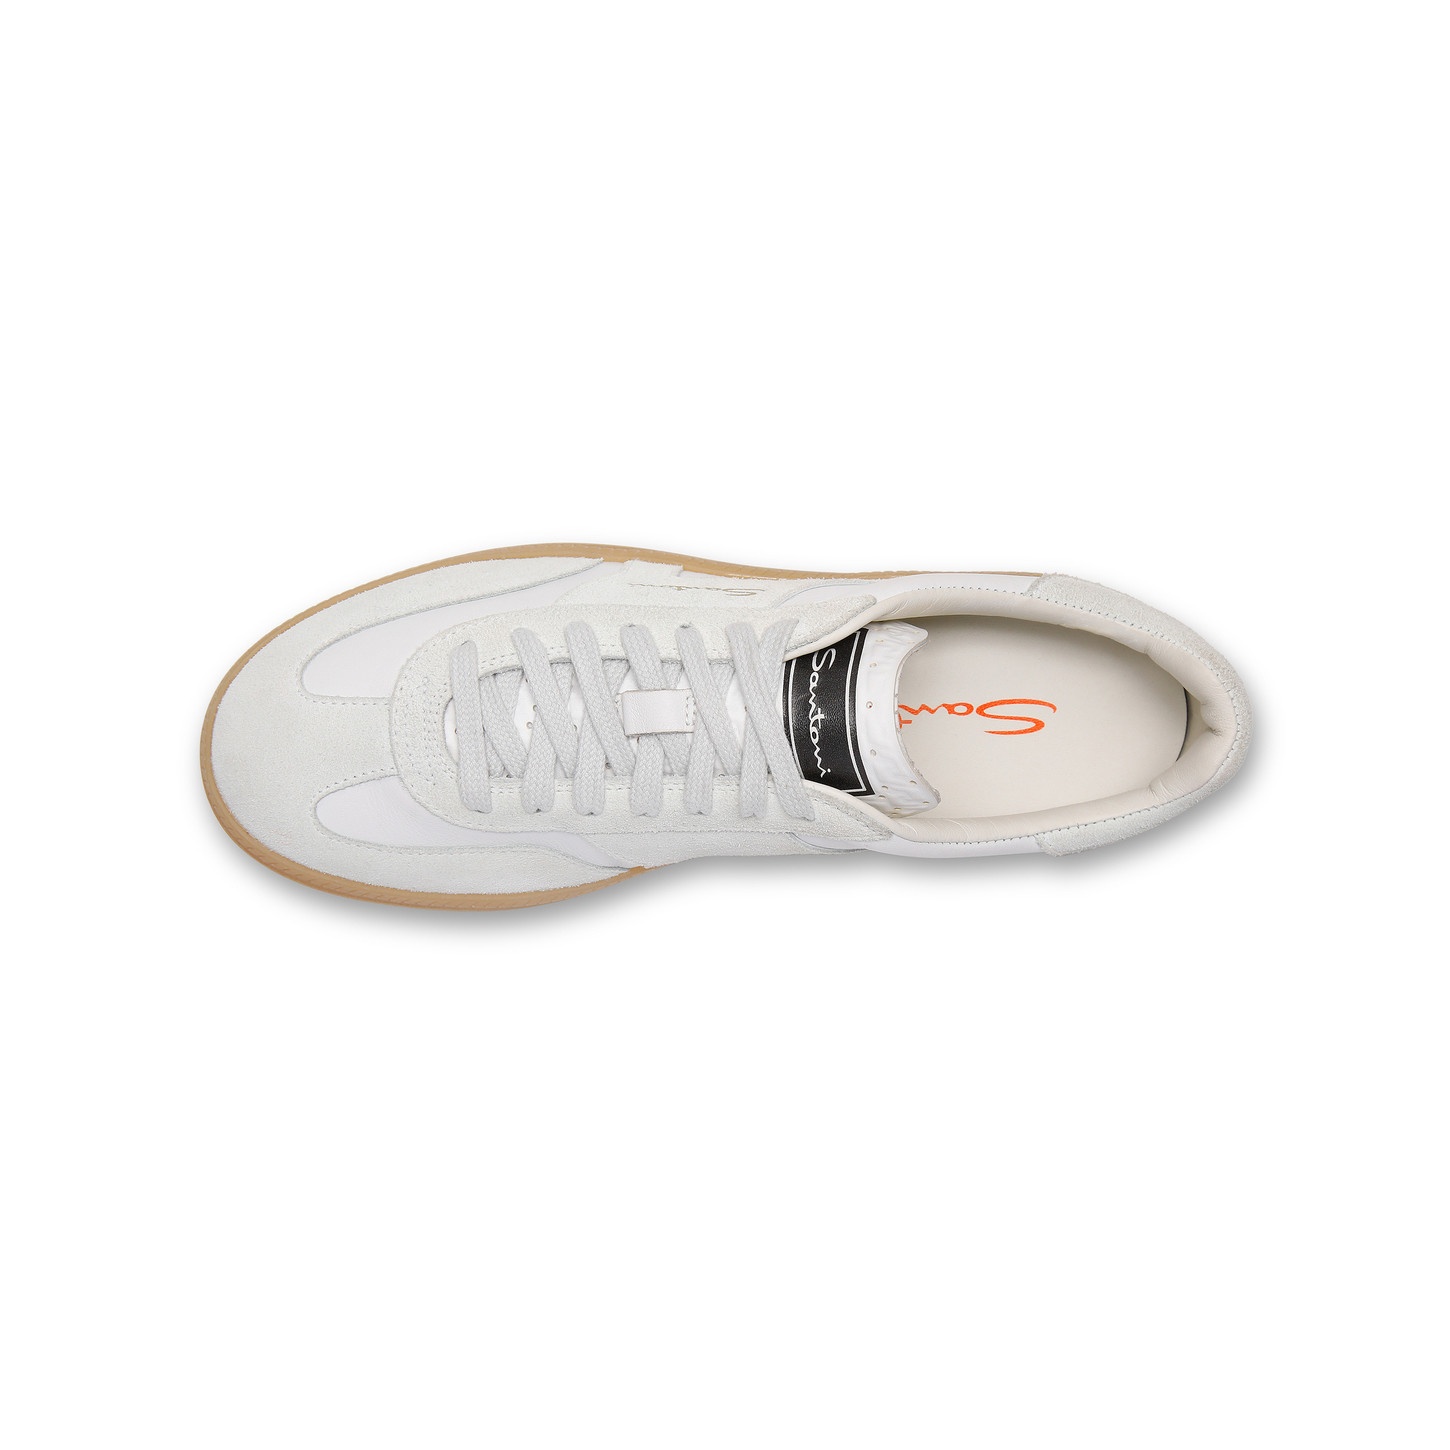 Women's white tumbled leather DBS Oly sneaker - 4